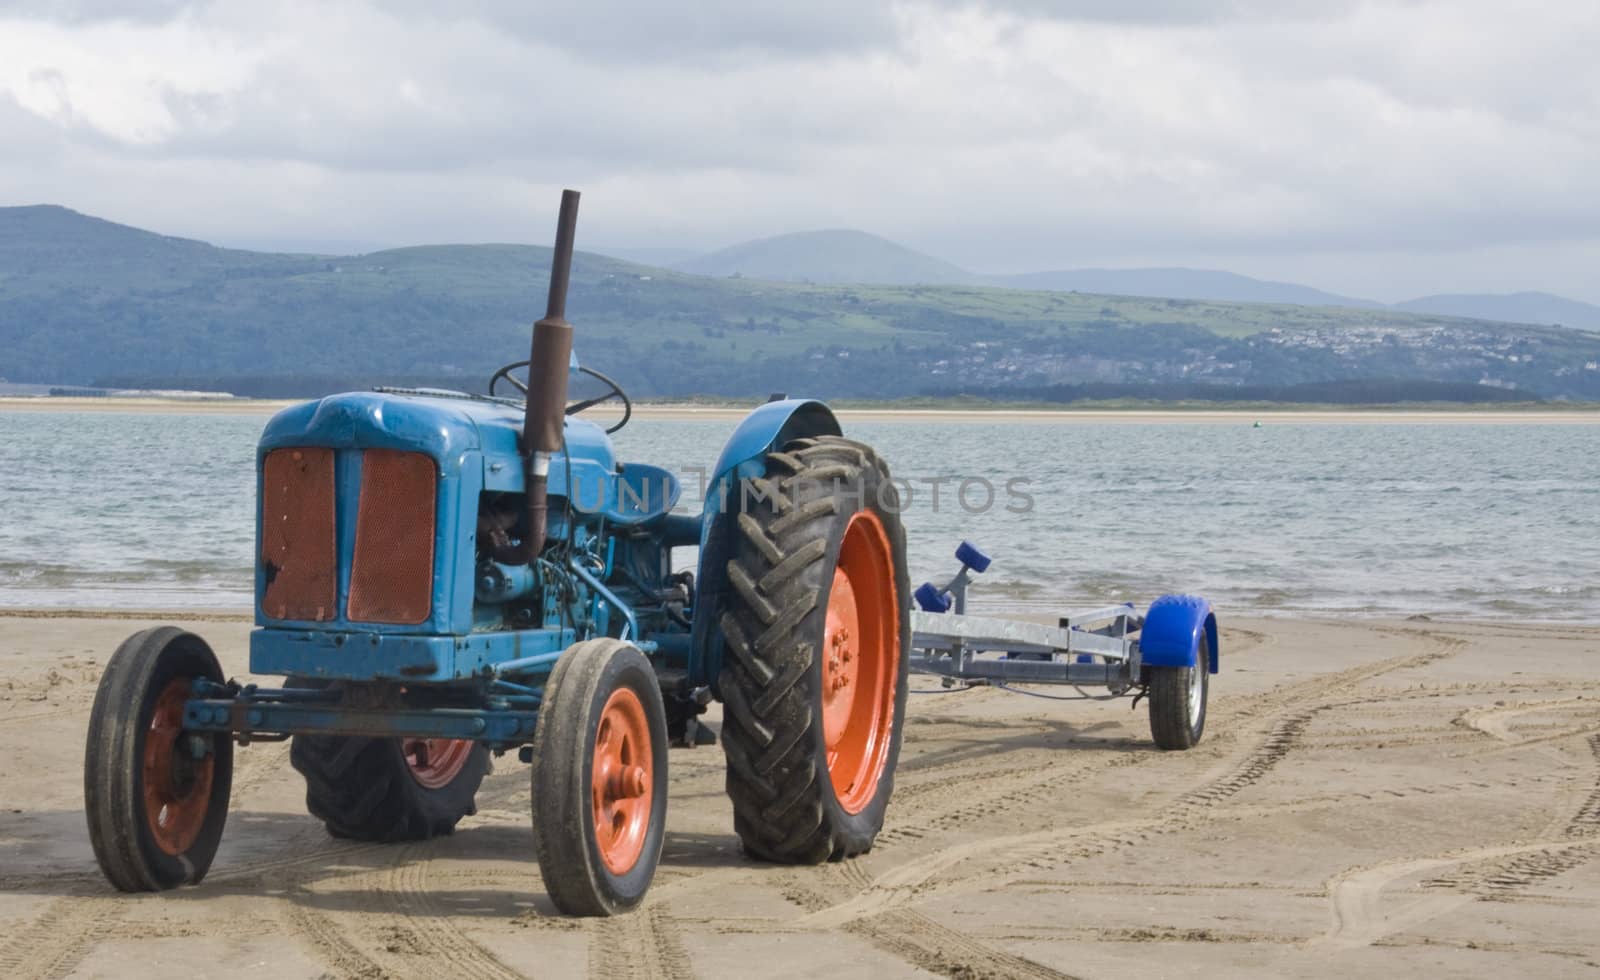 Tractor on the beach. by groomee